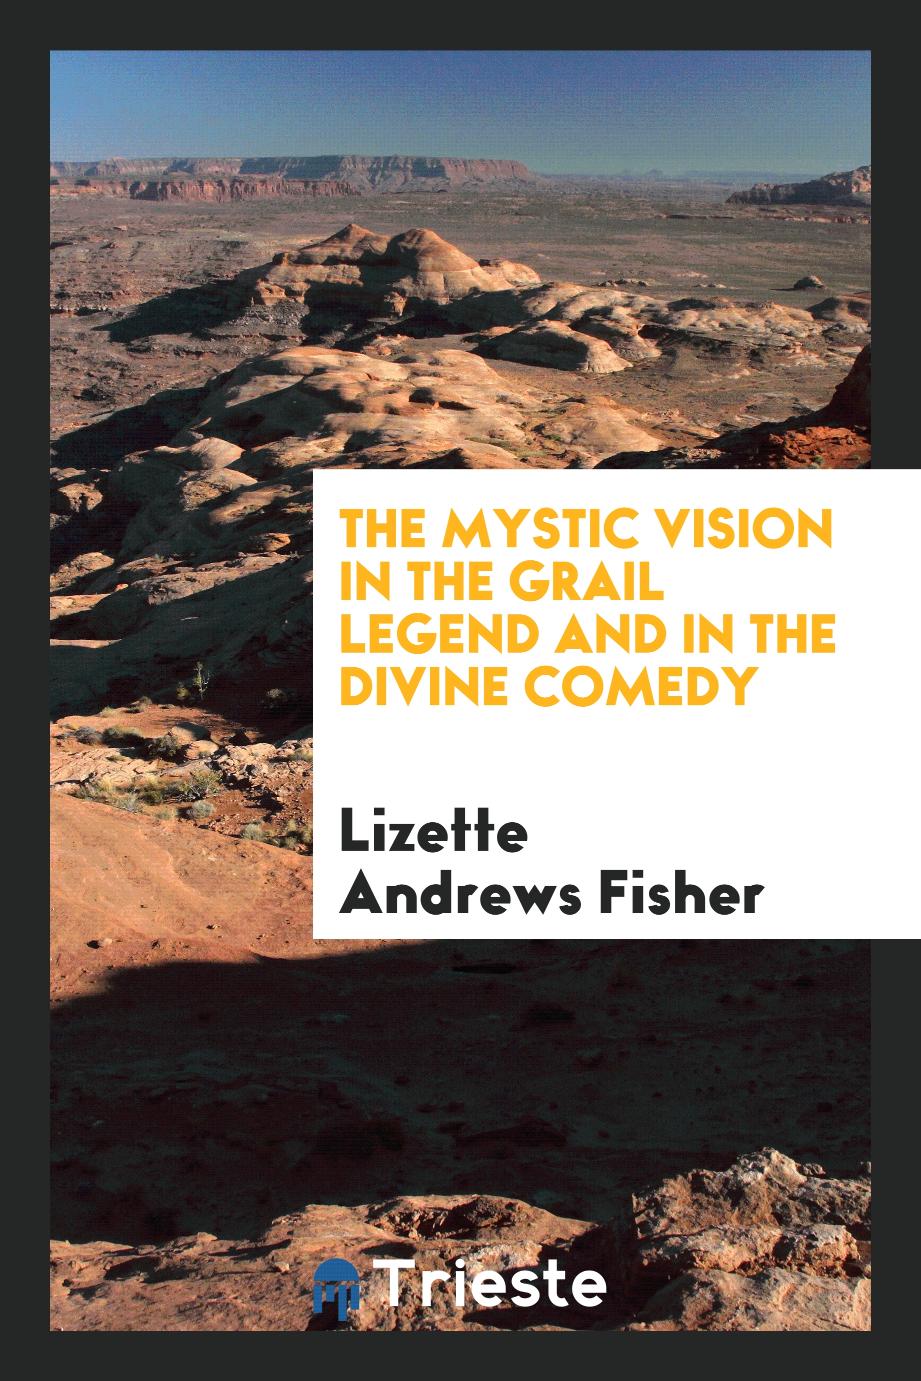 The mystic vision in the Grail legend and in the Divine comedy